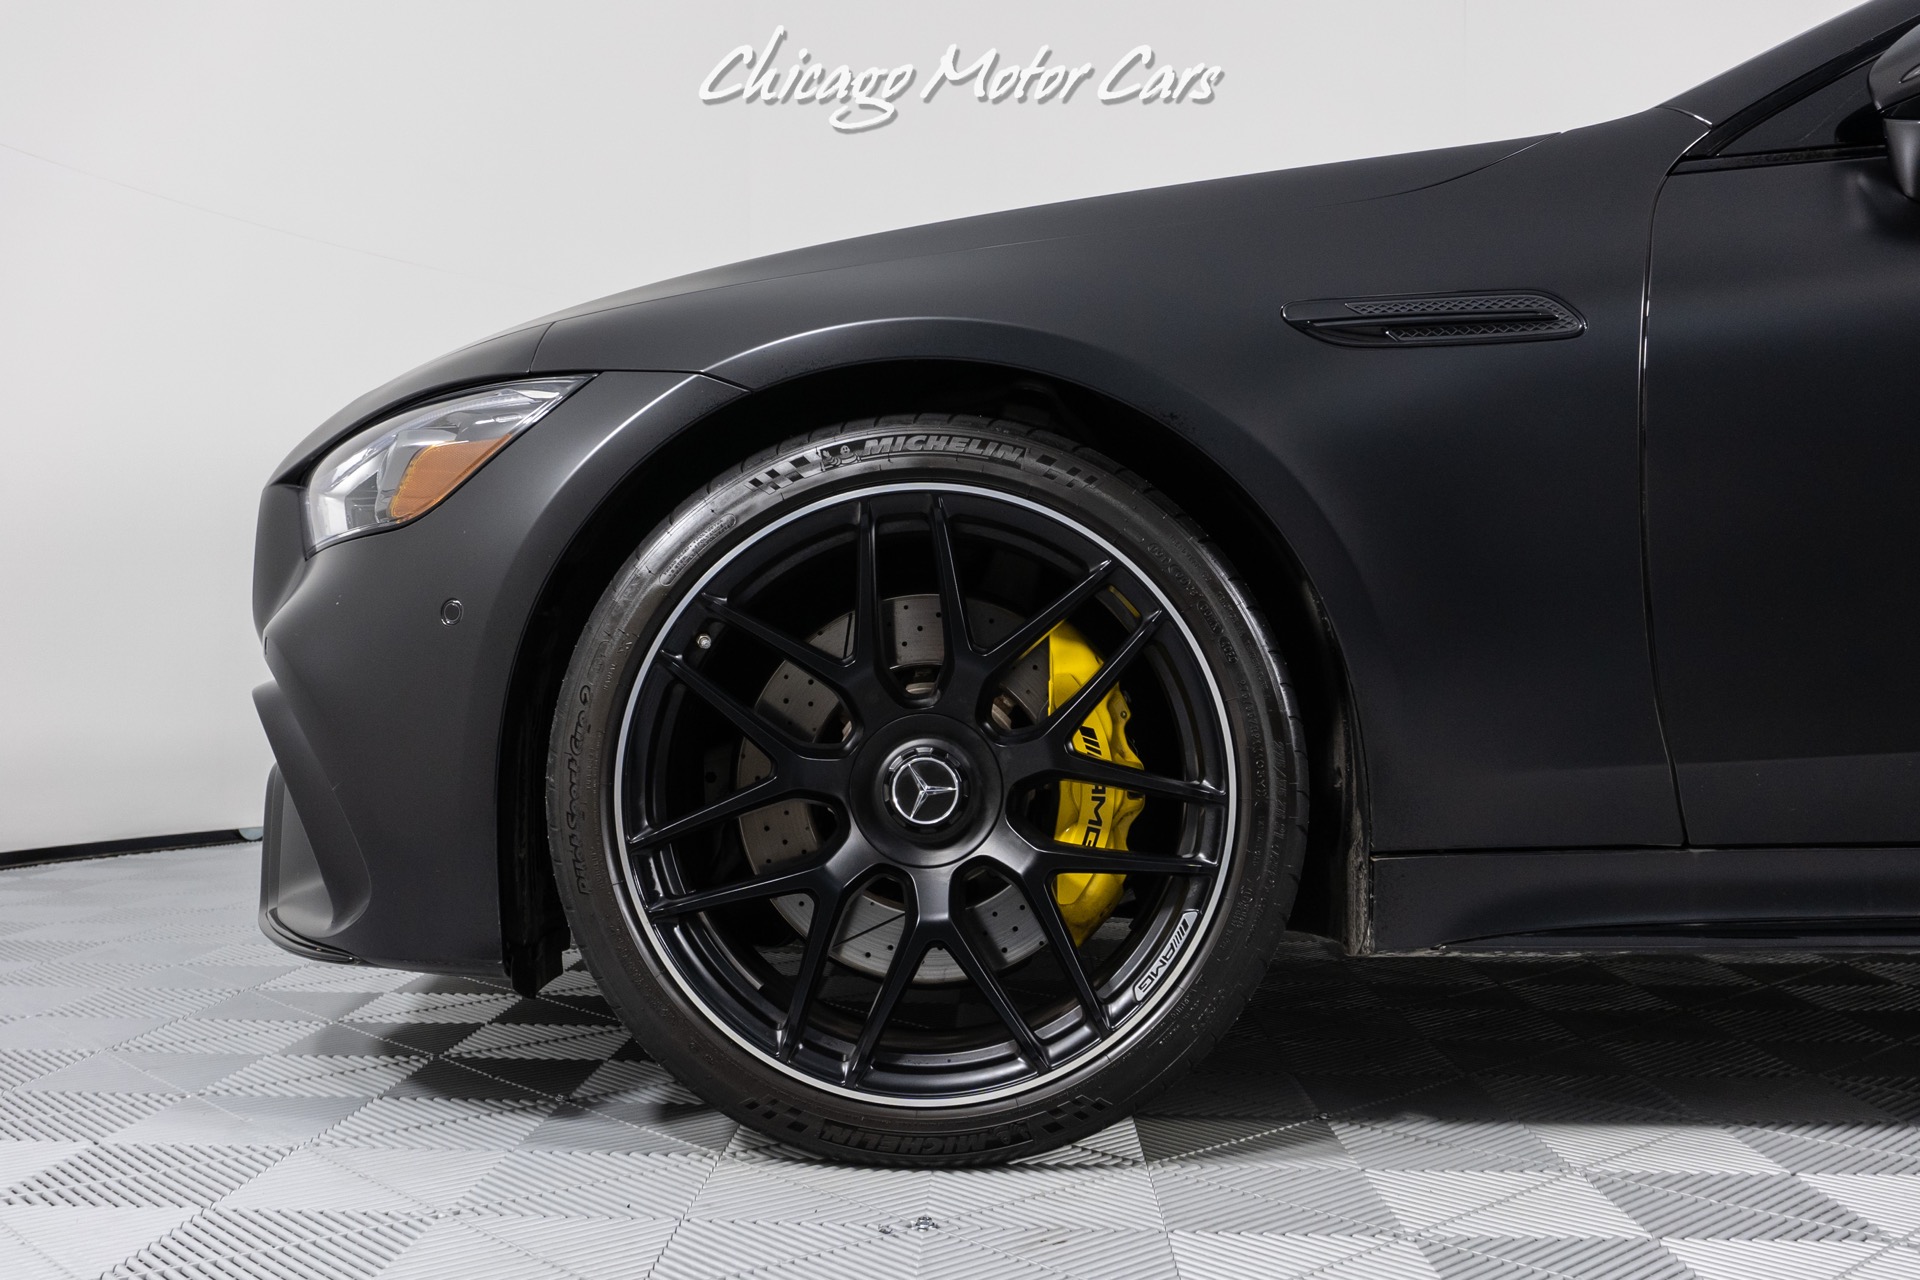 E63 AMG with a nice V8 Biturbo and yellow brake calipers : r